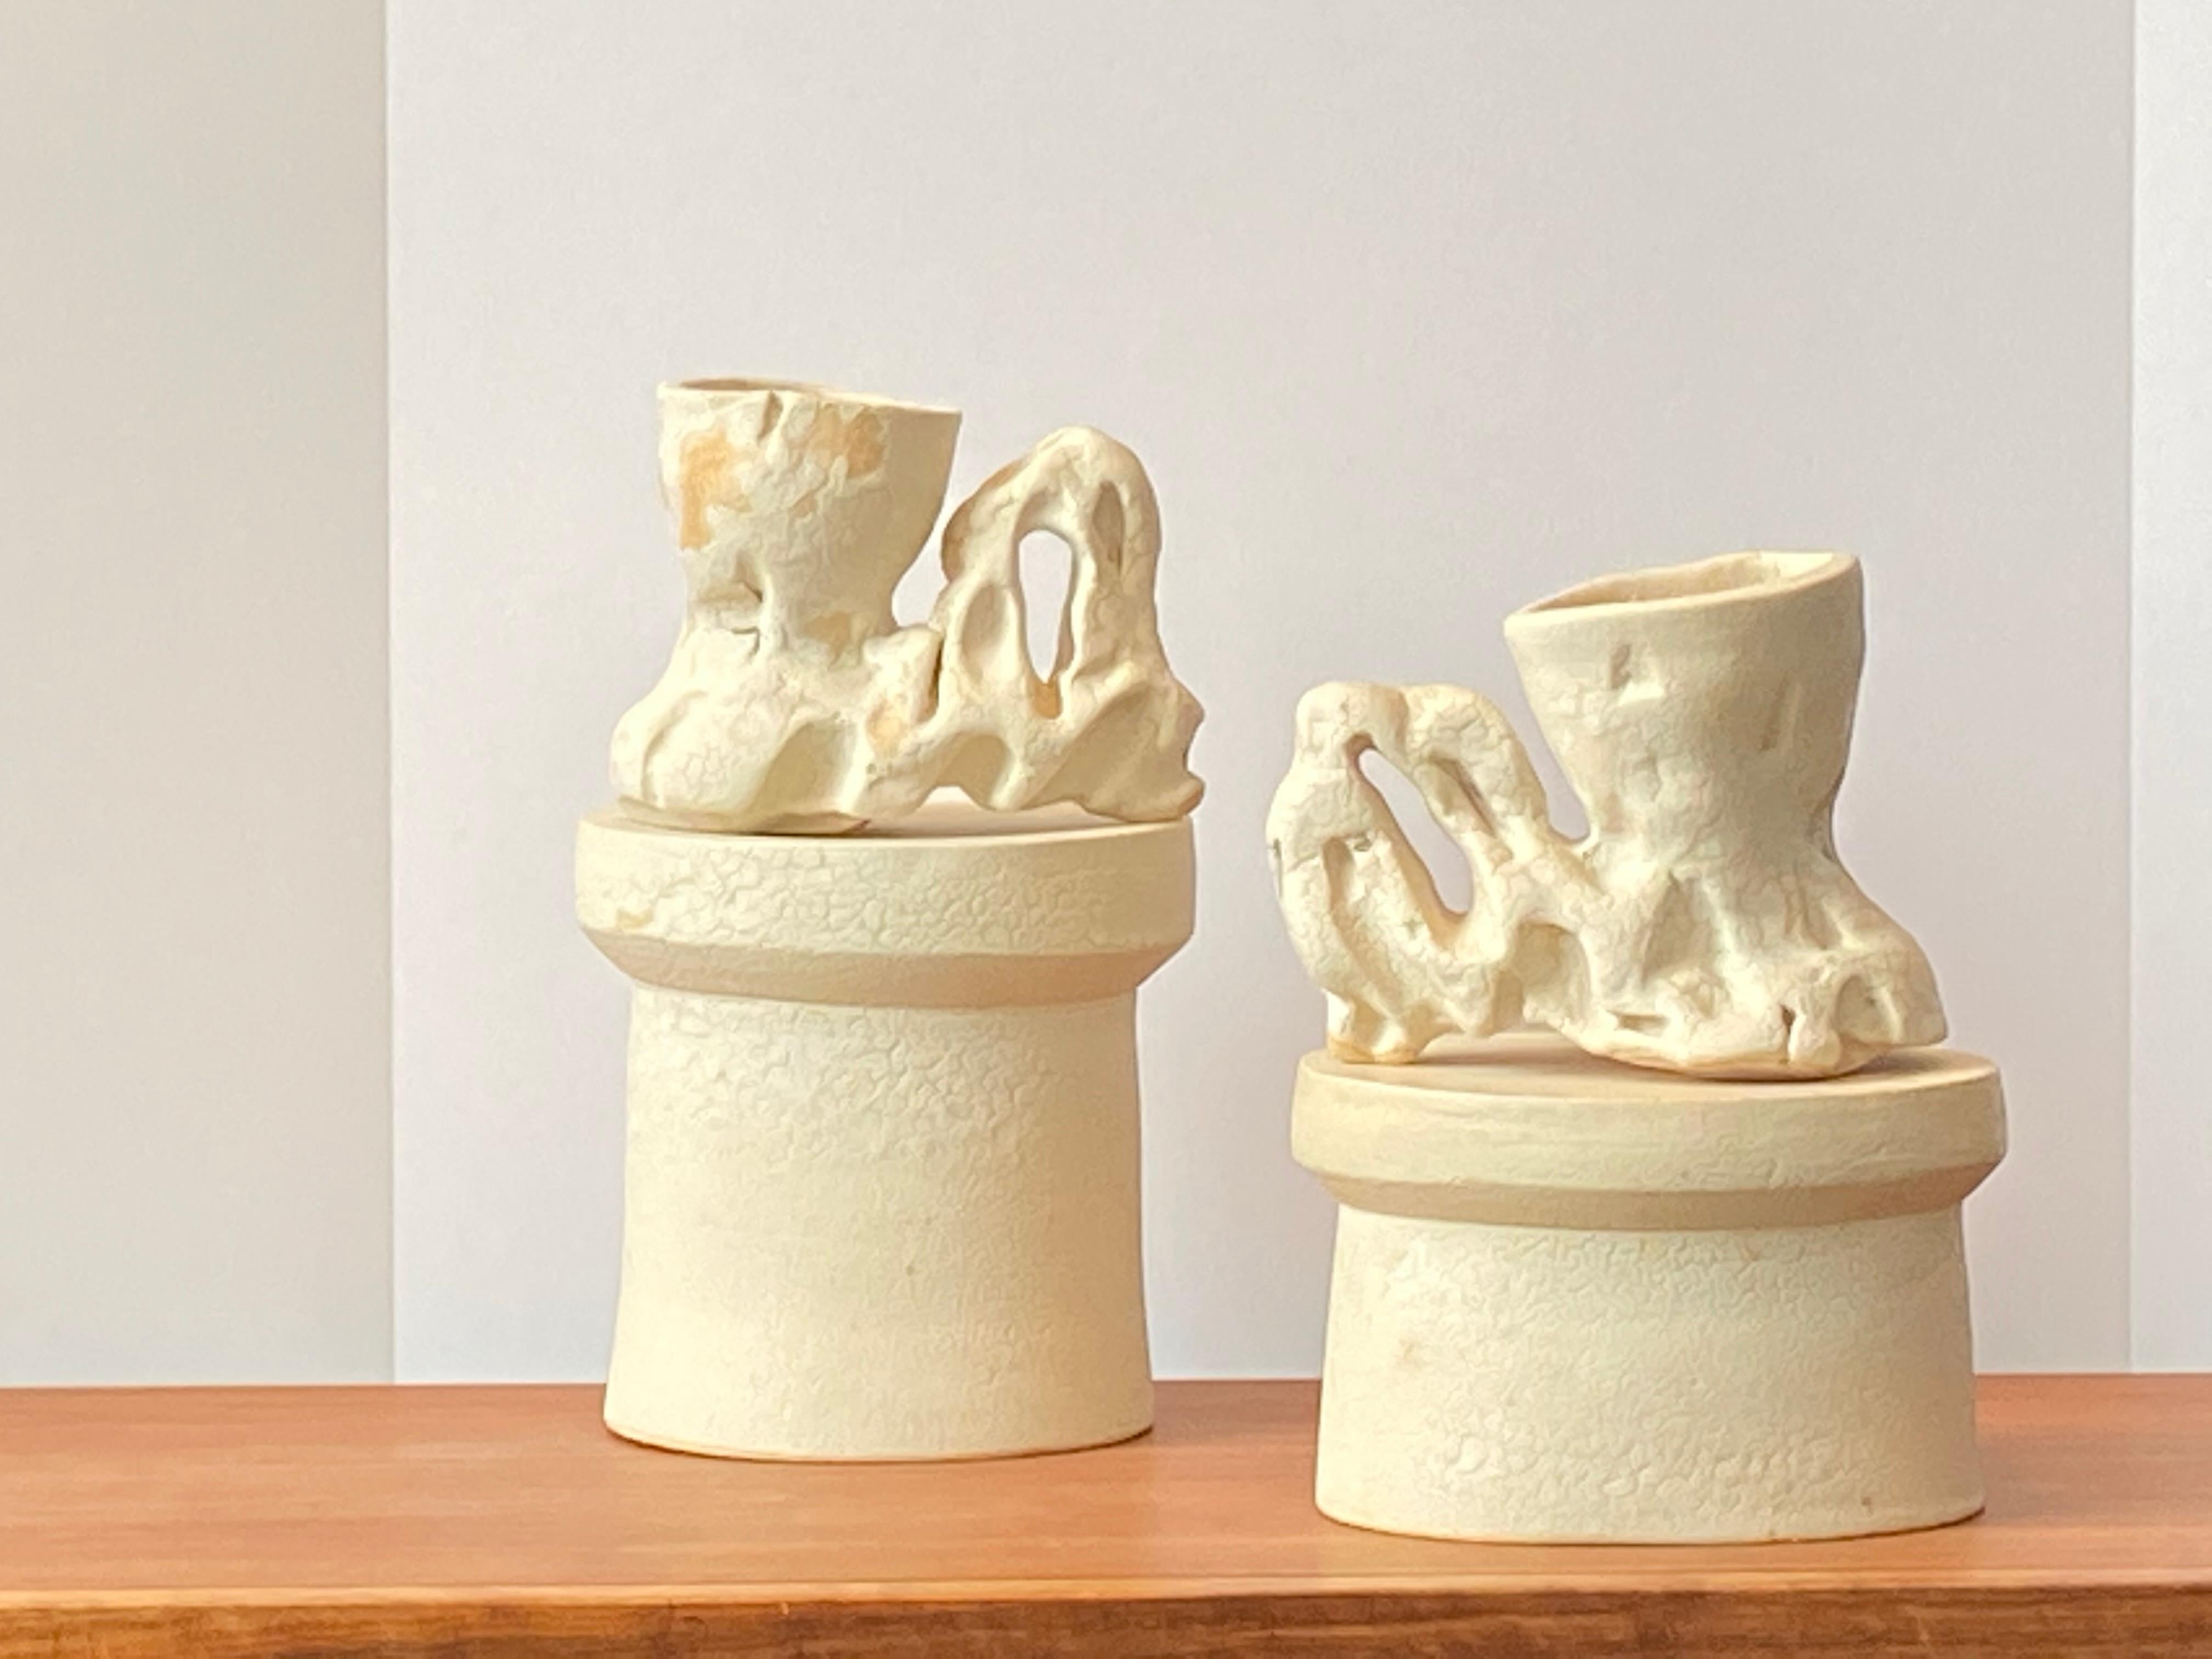 Modern Richard Hirsch Ceramic Creamy White Primal Cups with Stands, 2018 For Sale